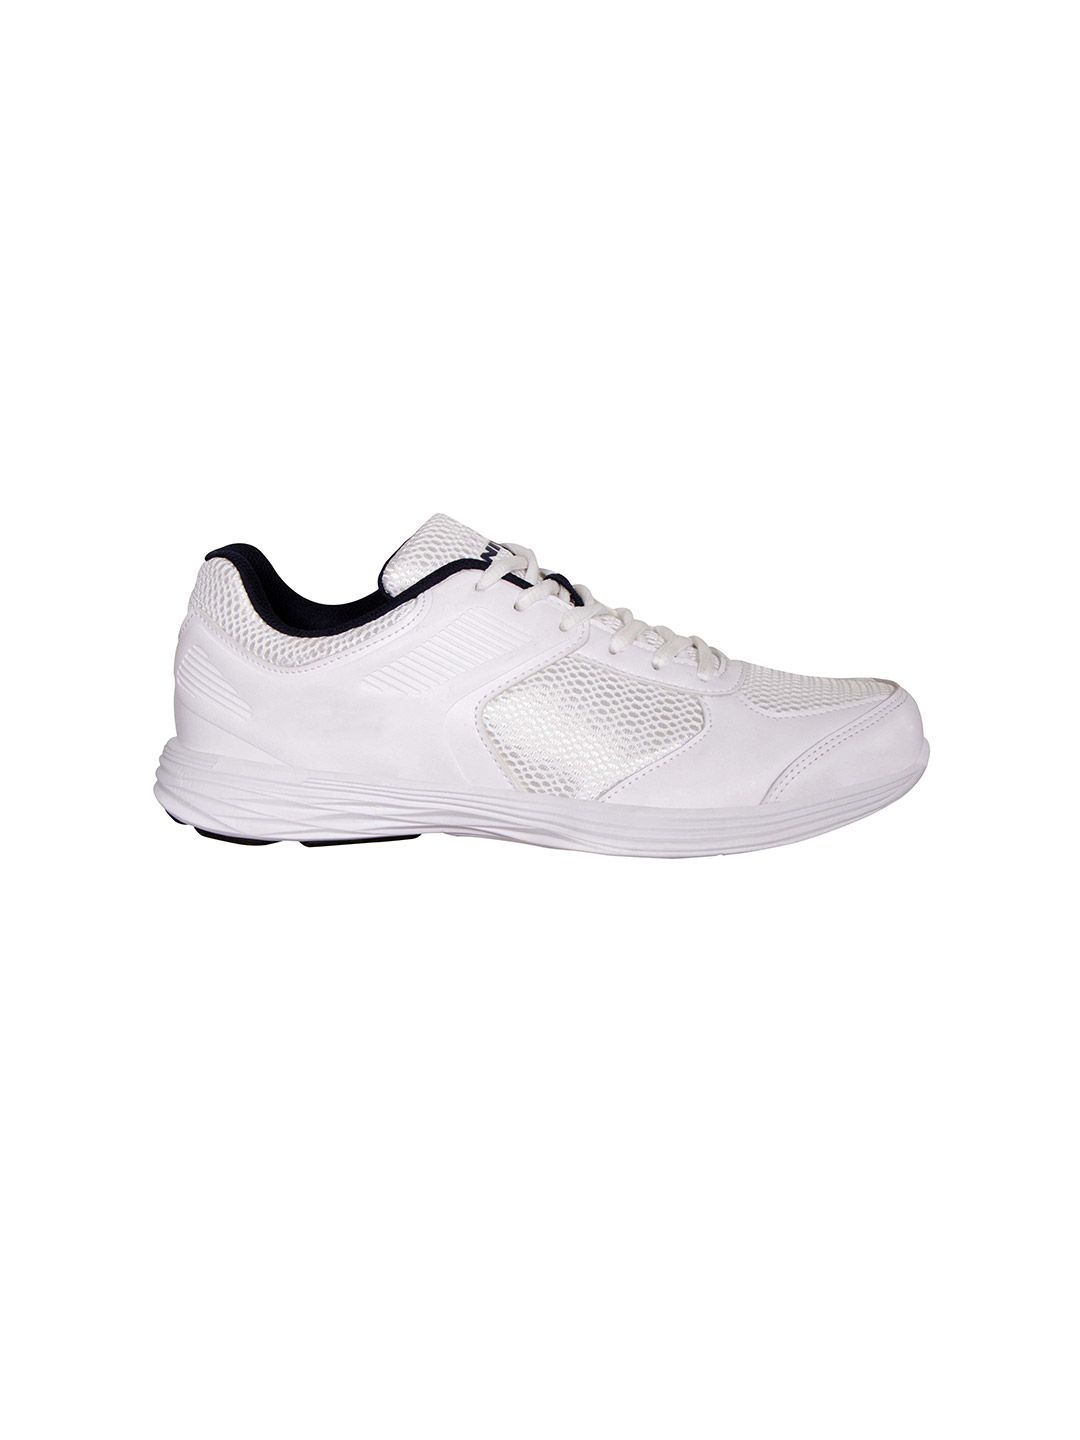 Buy Men White New Hawks Running Shoes From Fancode Shop.